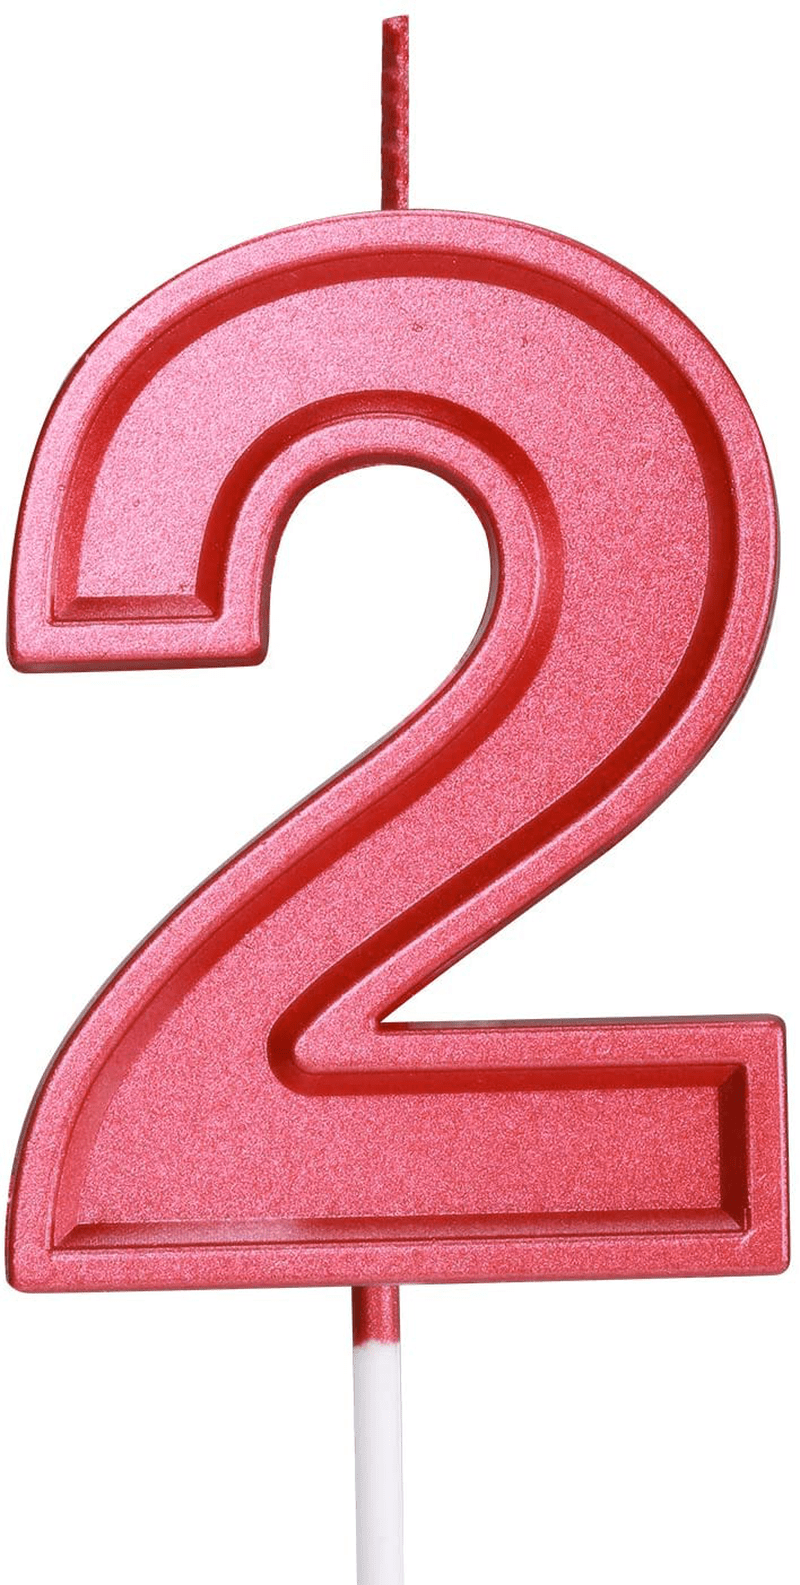 Birthday Candle Numbers Red Glitter Happy Birthday Numeral for Weddings, Reunions, Theme Party Perfect Baby’s Pet’s Birthday Cake Candle (Red, 7)